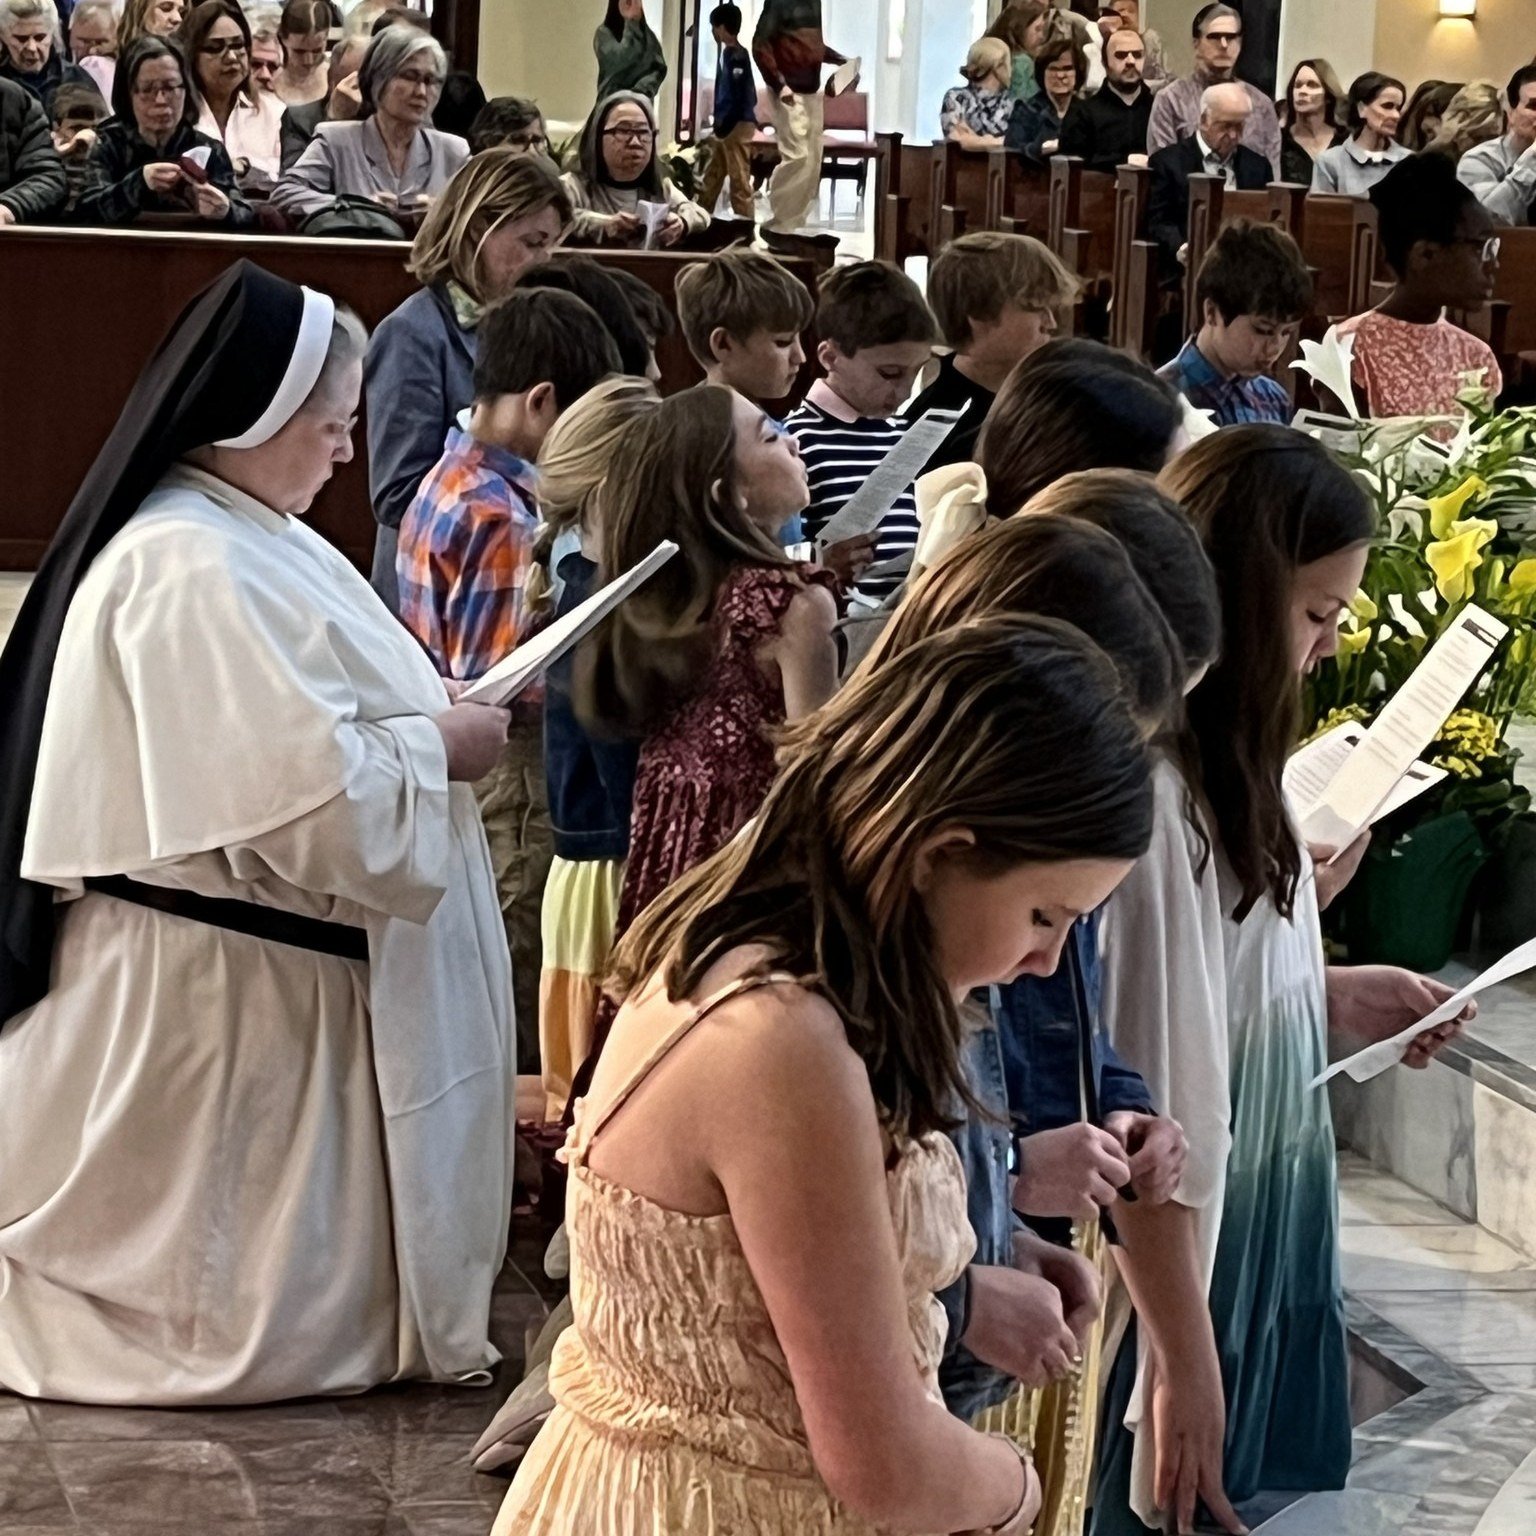 Our 5th Graders praying The Divine Mercy Chaplet. &quot;In the chaplet, the prayers revolve around the concepts of mercy and holiness for the whole world, and reflect the prayers and promises we make during the Mass. It&rsquo;s an extremely powerful 